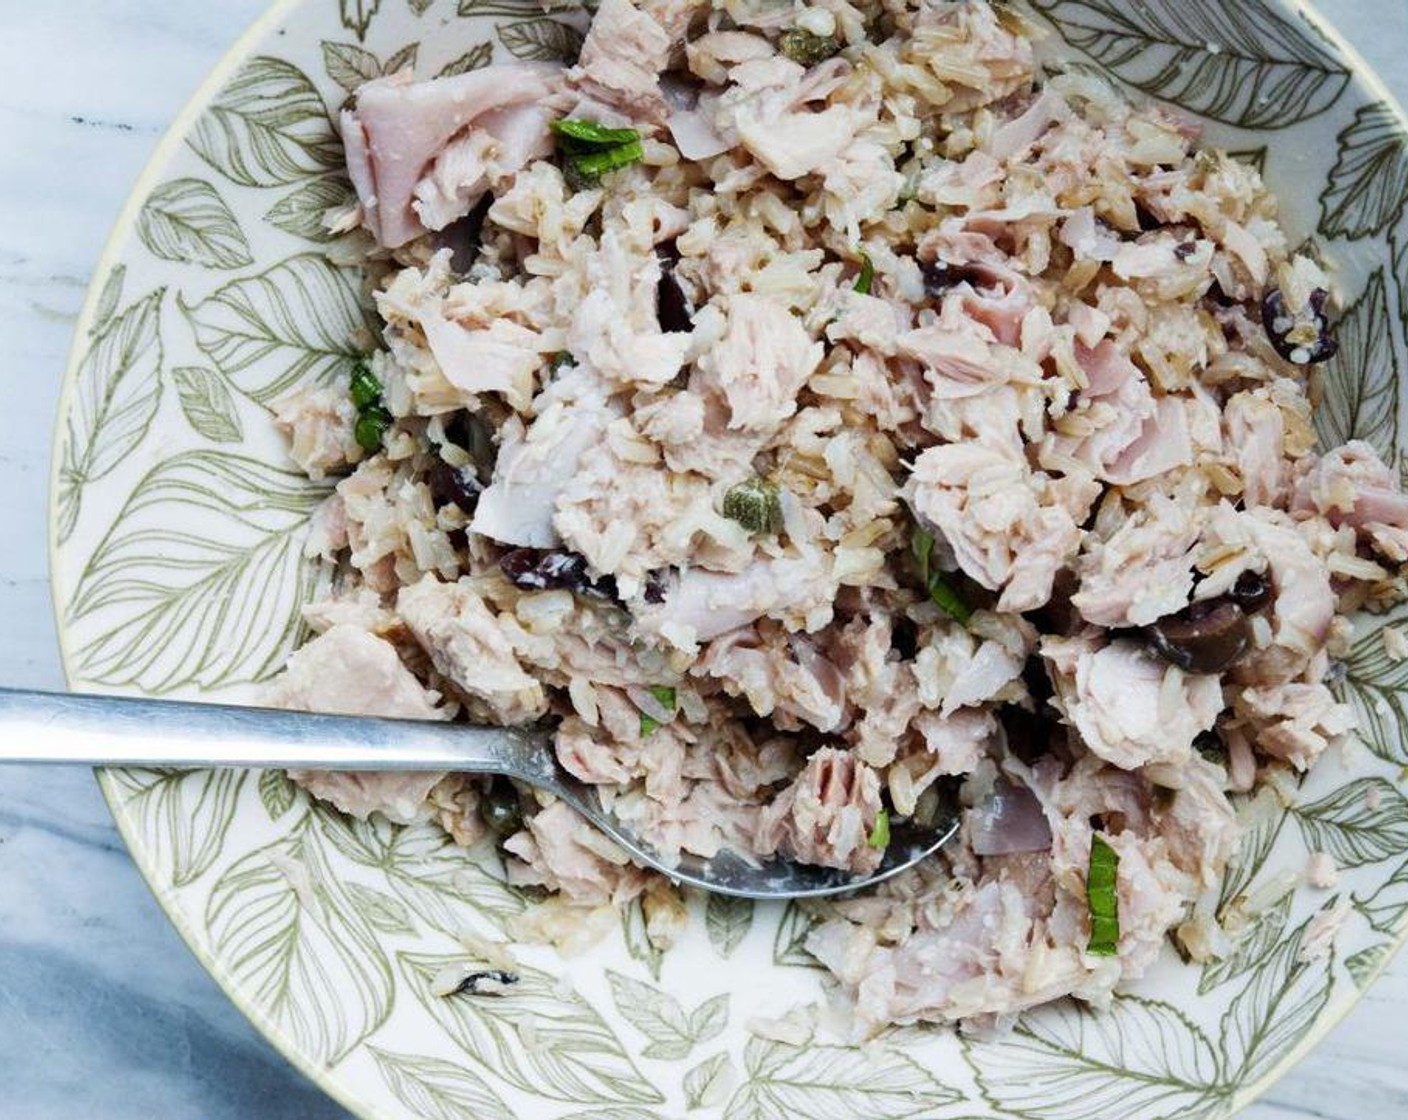 step 2 In a bowl, stir in Canned Tuna (1/2 cup), Capers (1 tsp), Parmesan Cheese (1 Tbsp), Prosciutto (2 oz), cooked Brown Rice (2 Tbsp), Salt (to taste) and Ground Black Pepper (to taste) and Fresh Parsley (1 Tbsp).